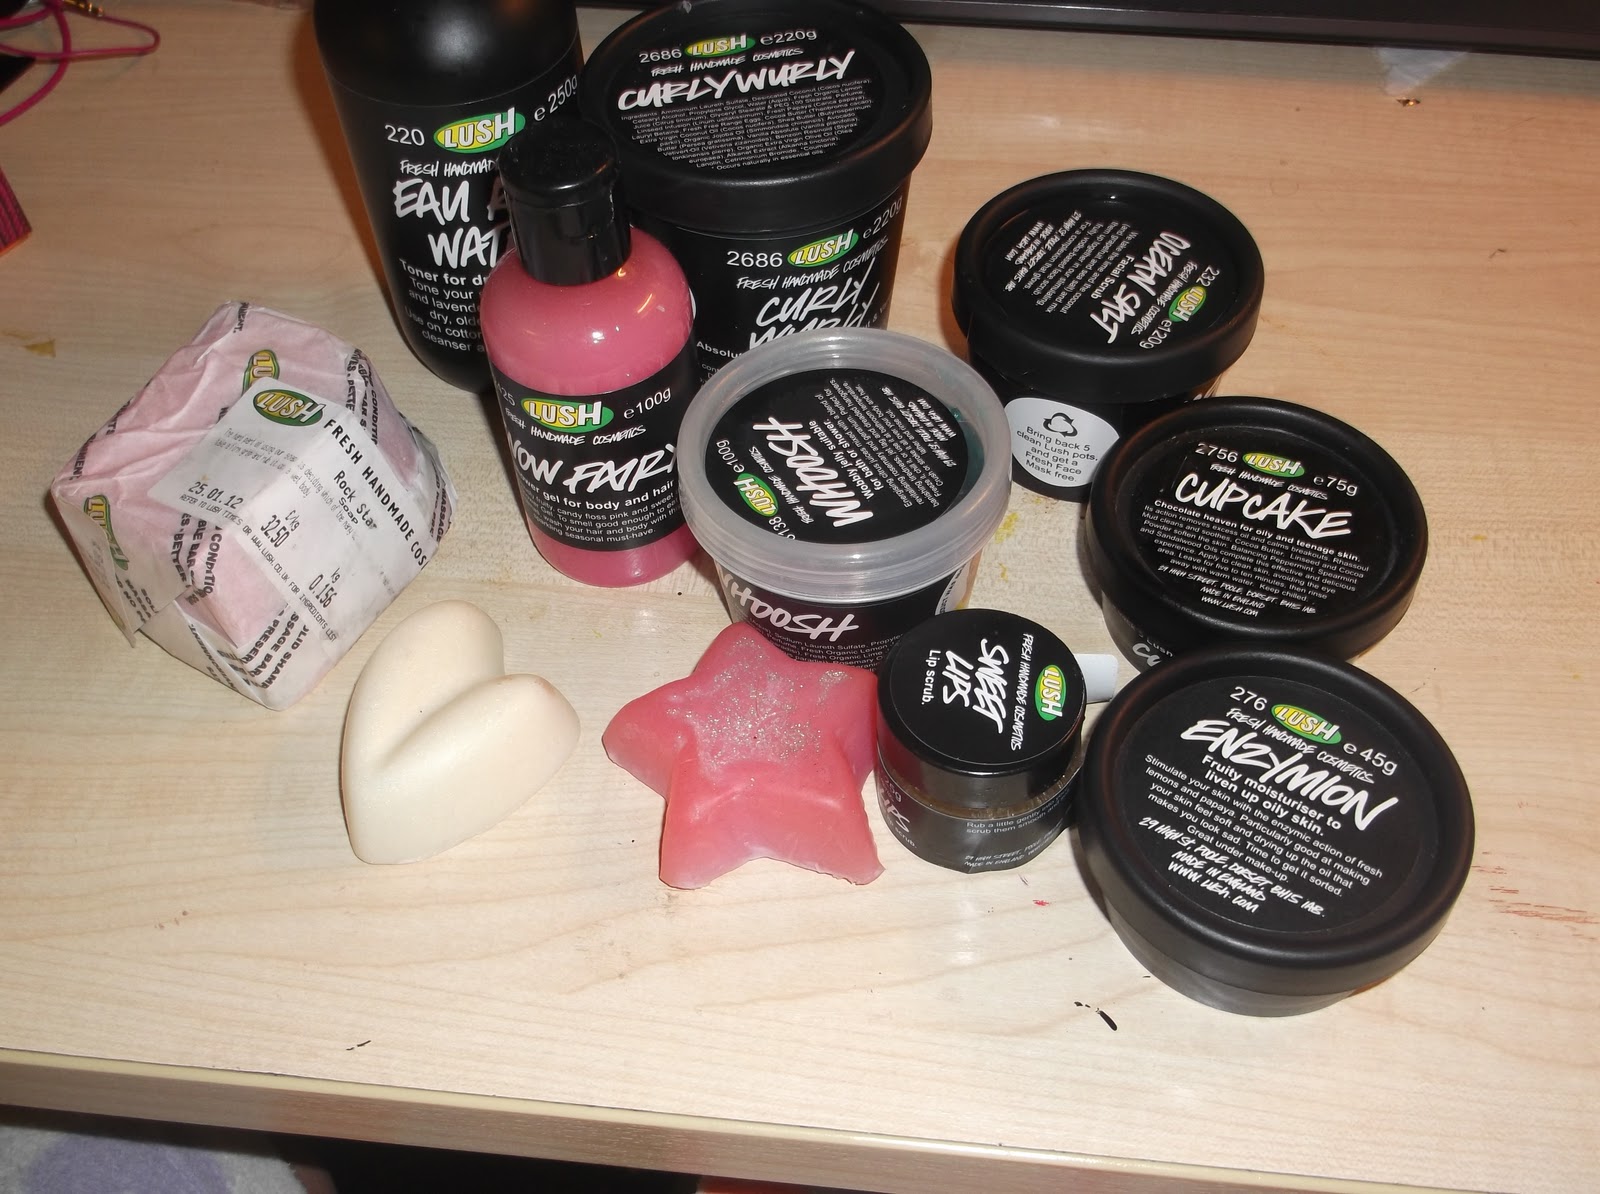 Life as a British Girl: My lush collection